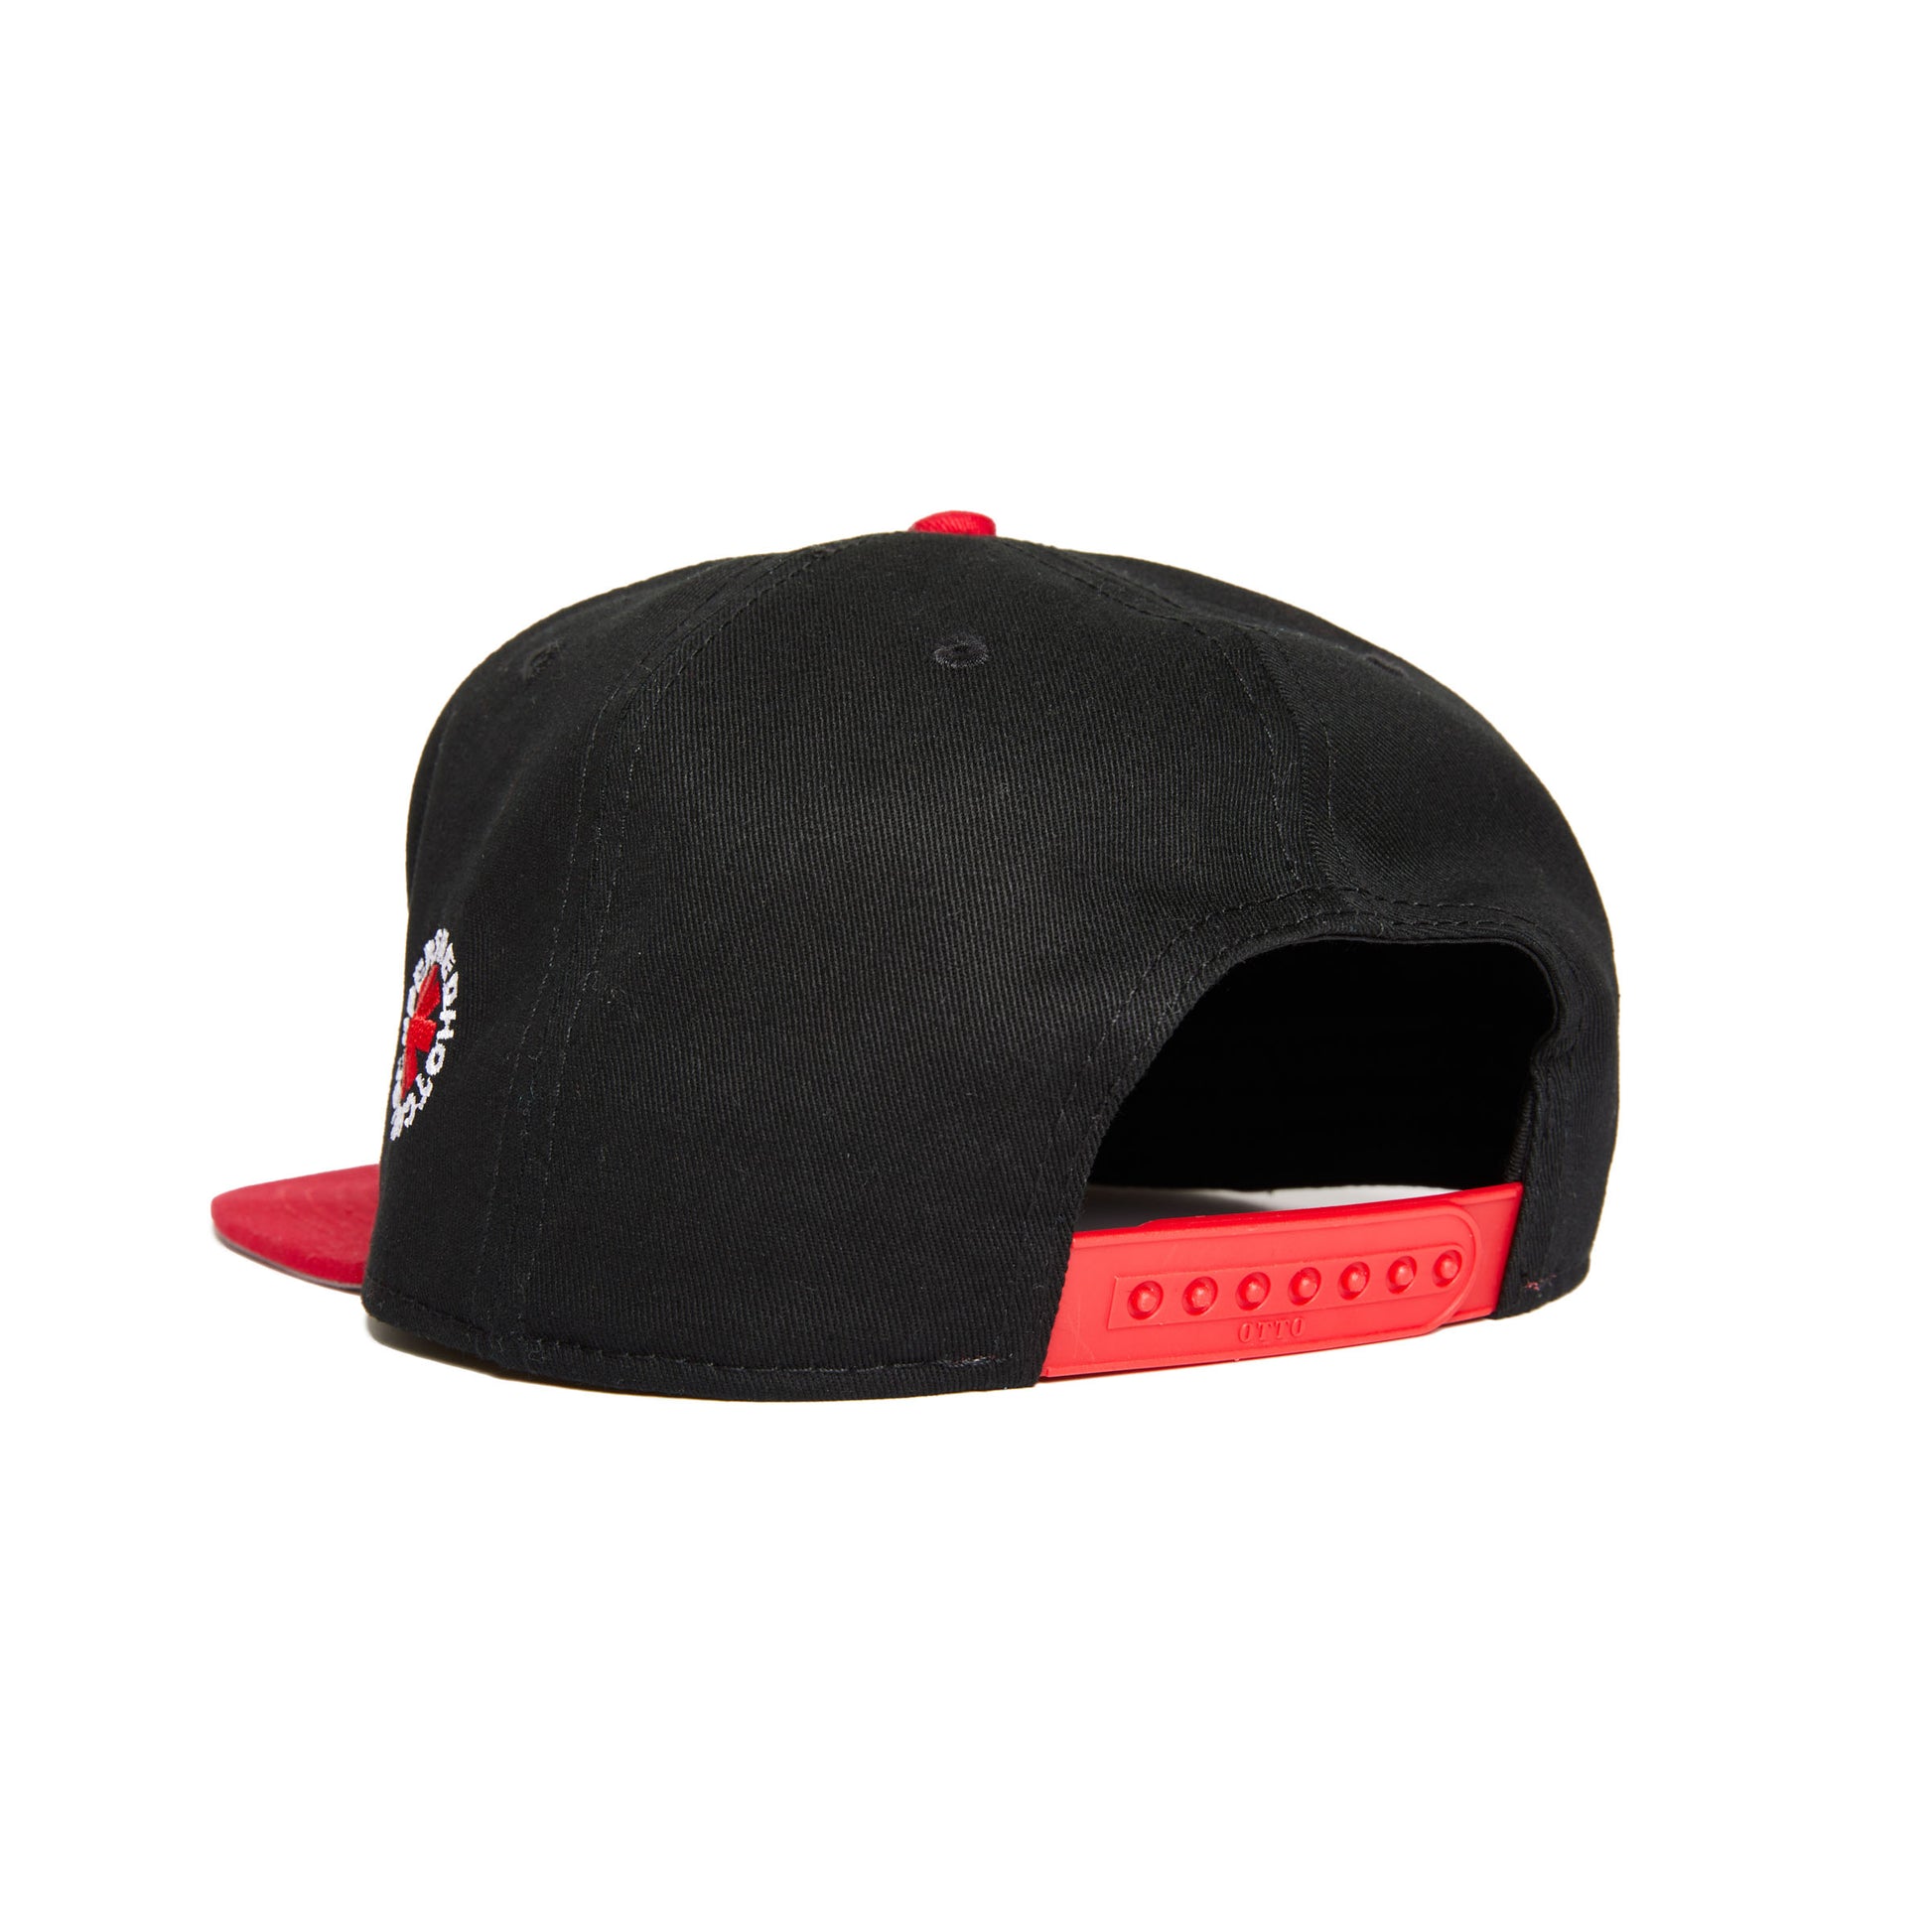 labyrint Misverstand Distributie Peppers Snapback Hat - Black/Red – Red Hot Chili Peppers